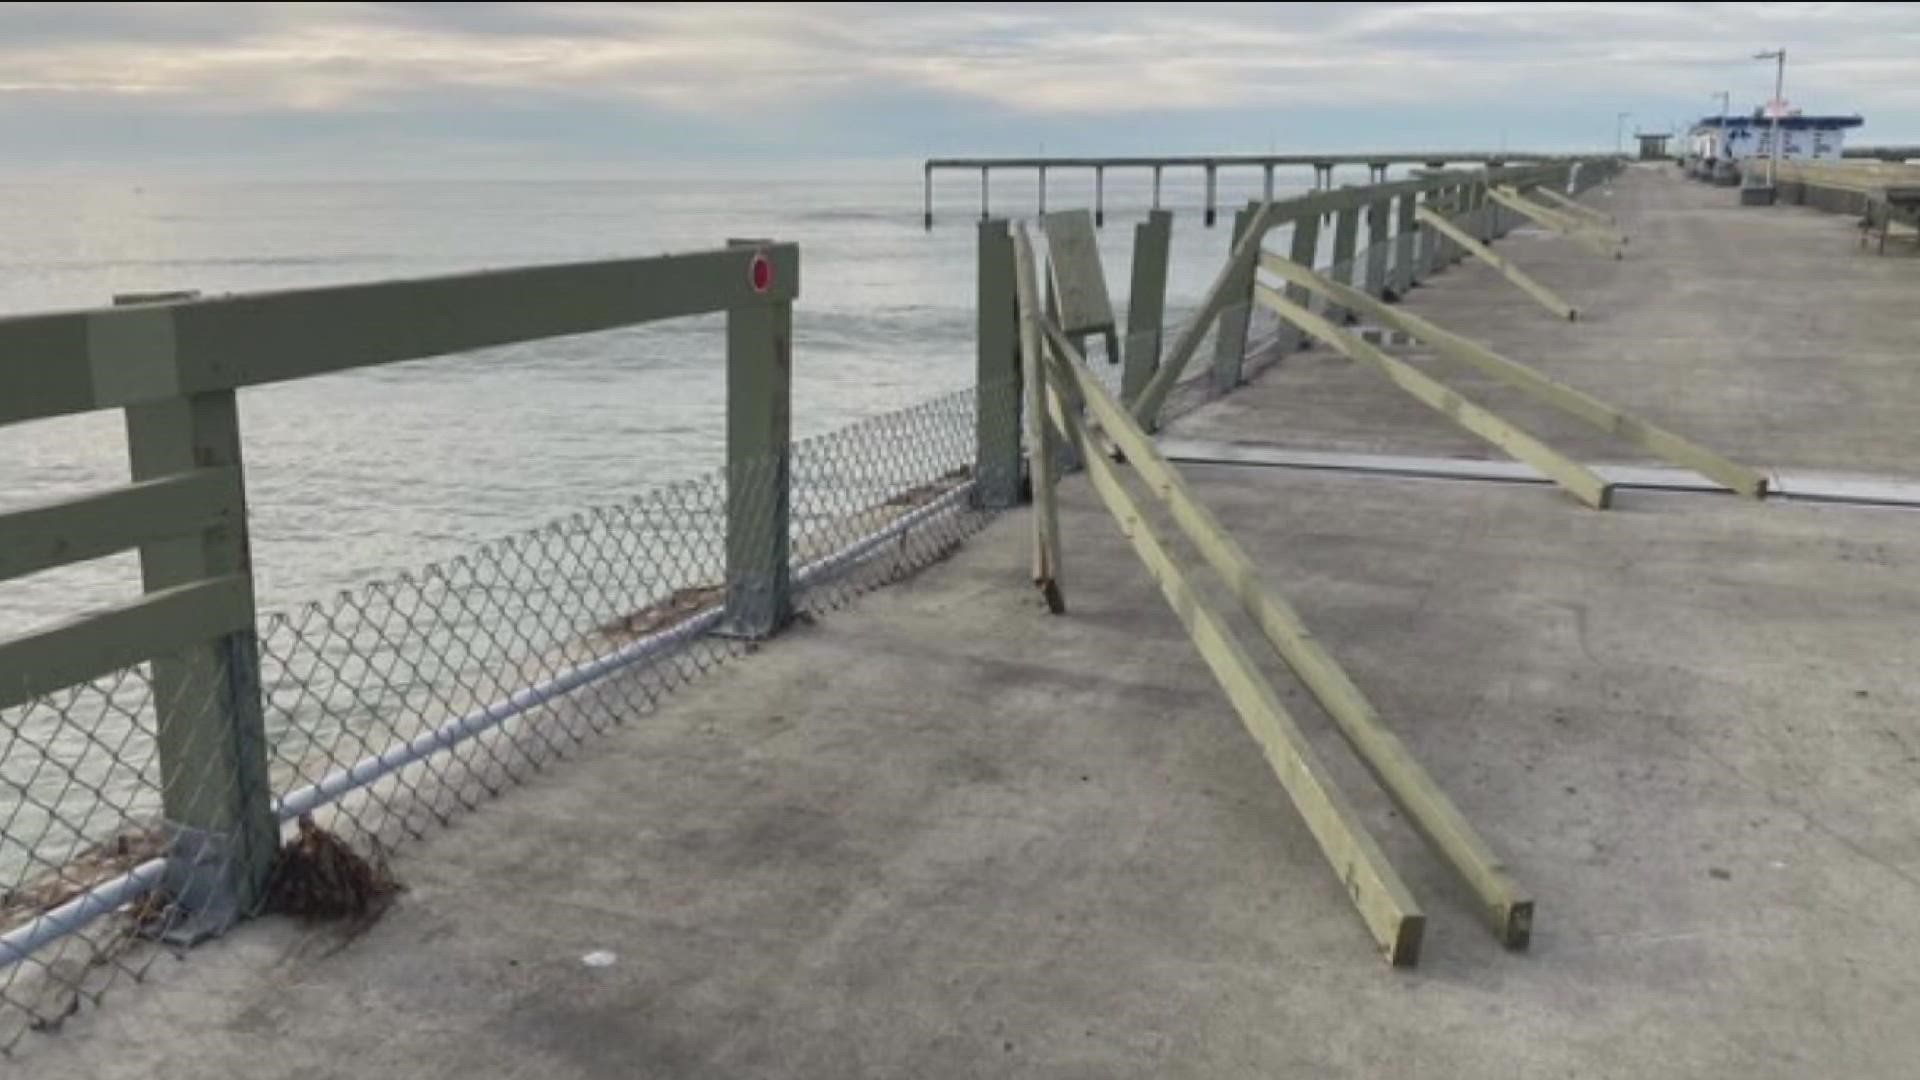 The city will wait to assess the pier’s condition until after the storm season has passed.